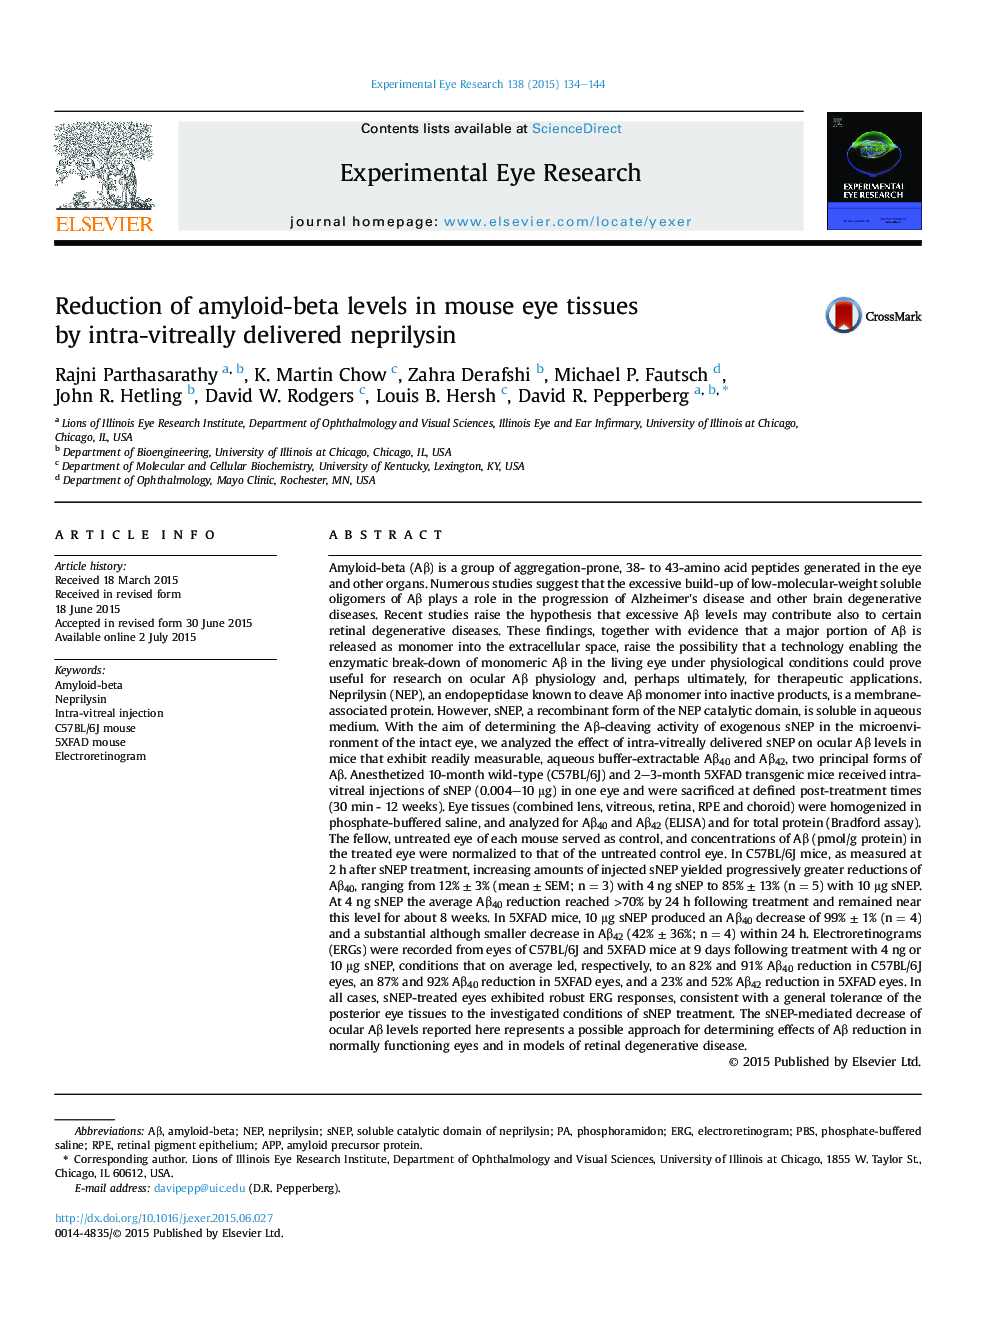 Reduction of amyloid-beta levels in mouse eye tissues byÂ intra-vitreally delivered neprilysin